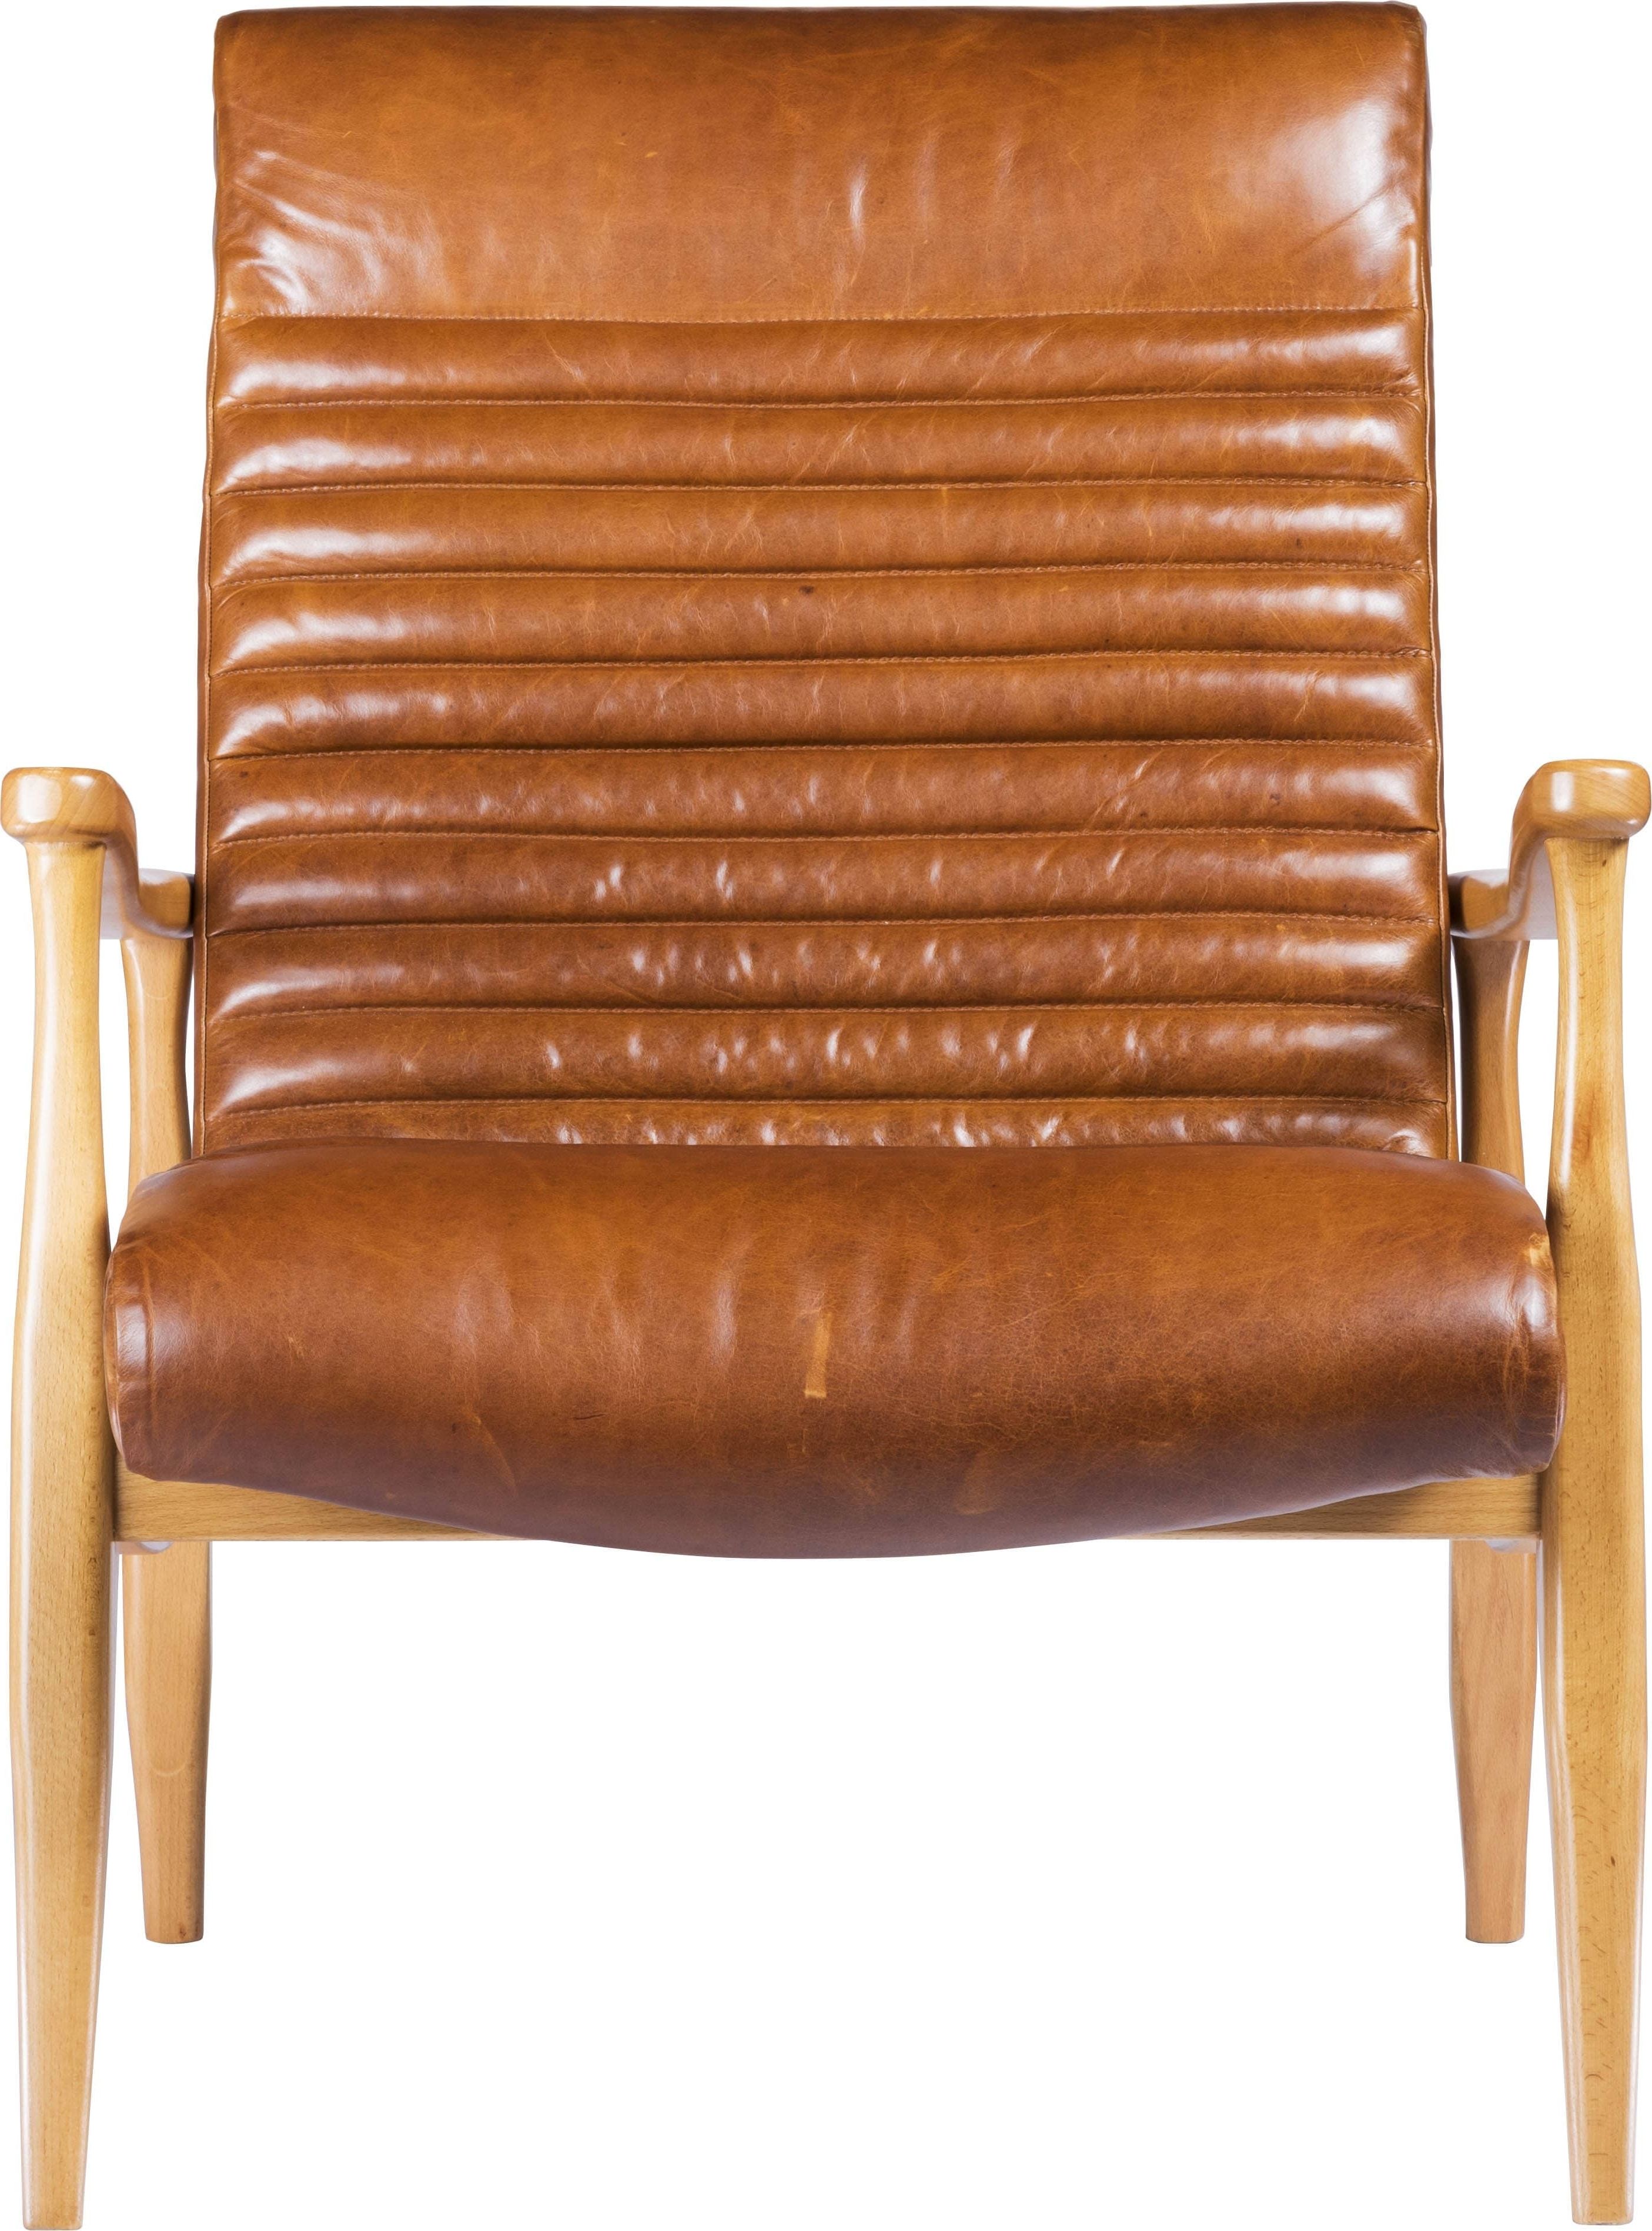 Laurent Wood Side Chairs Throughout Preferred Erik Chair Reynolds Caramel (View 18 of 20)